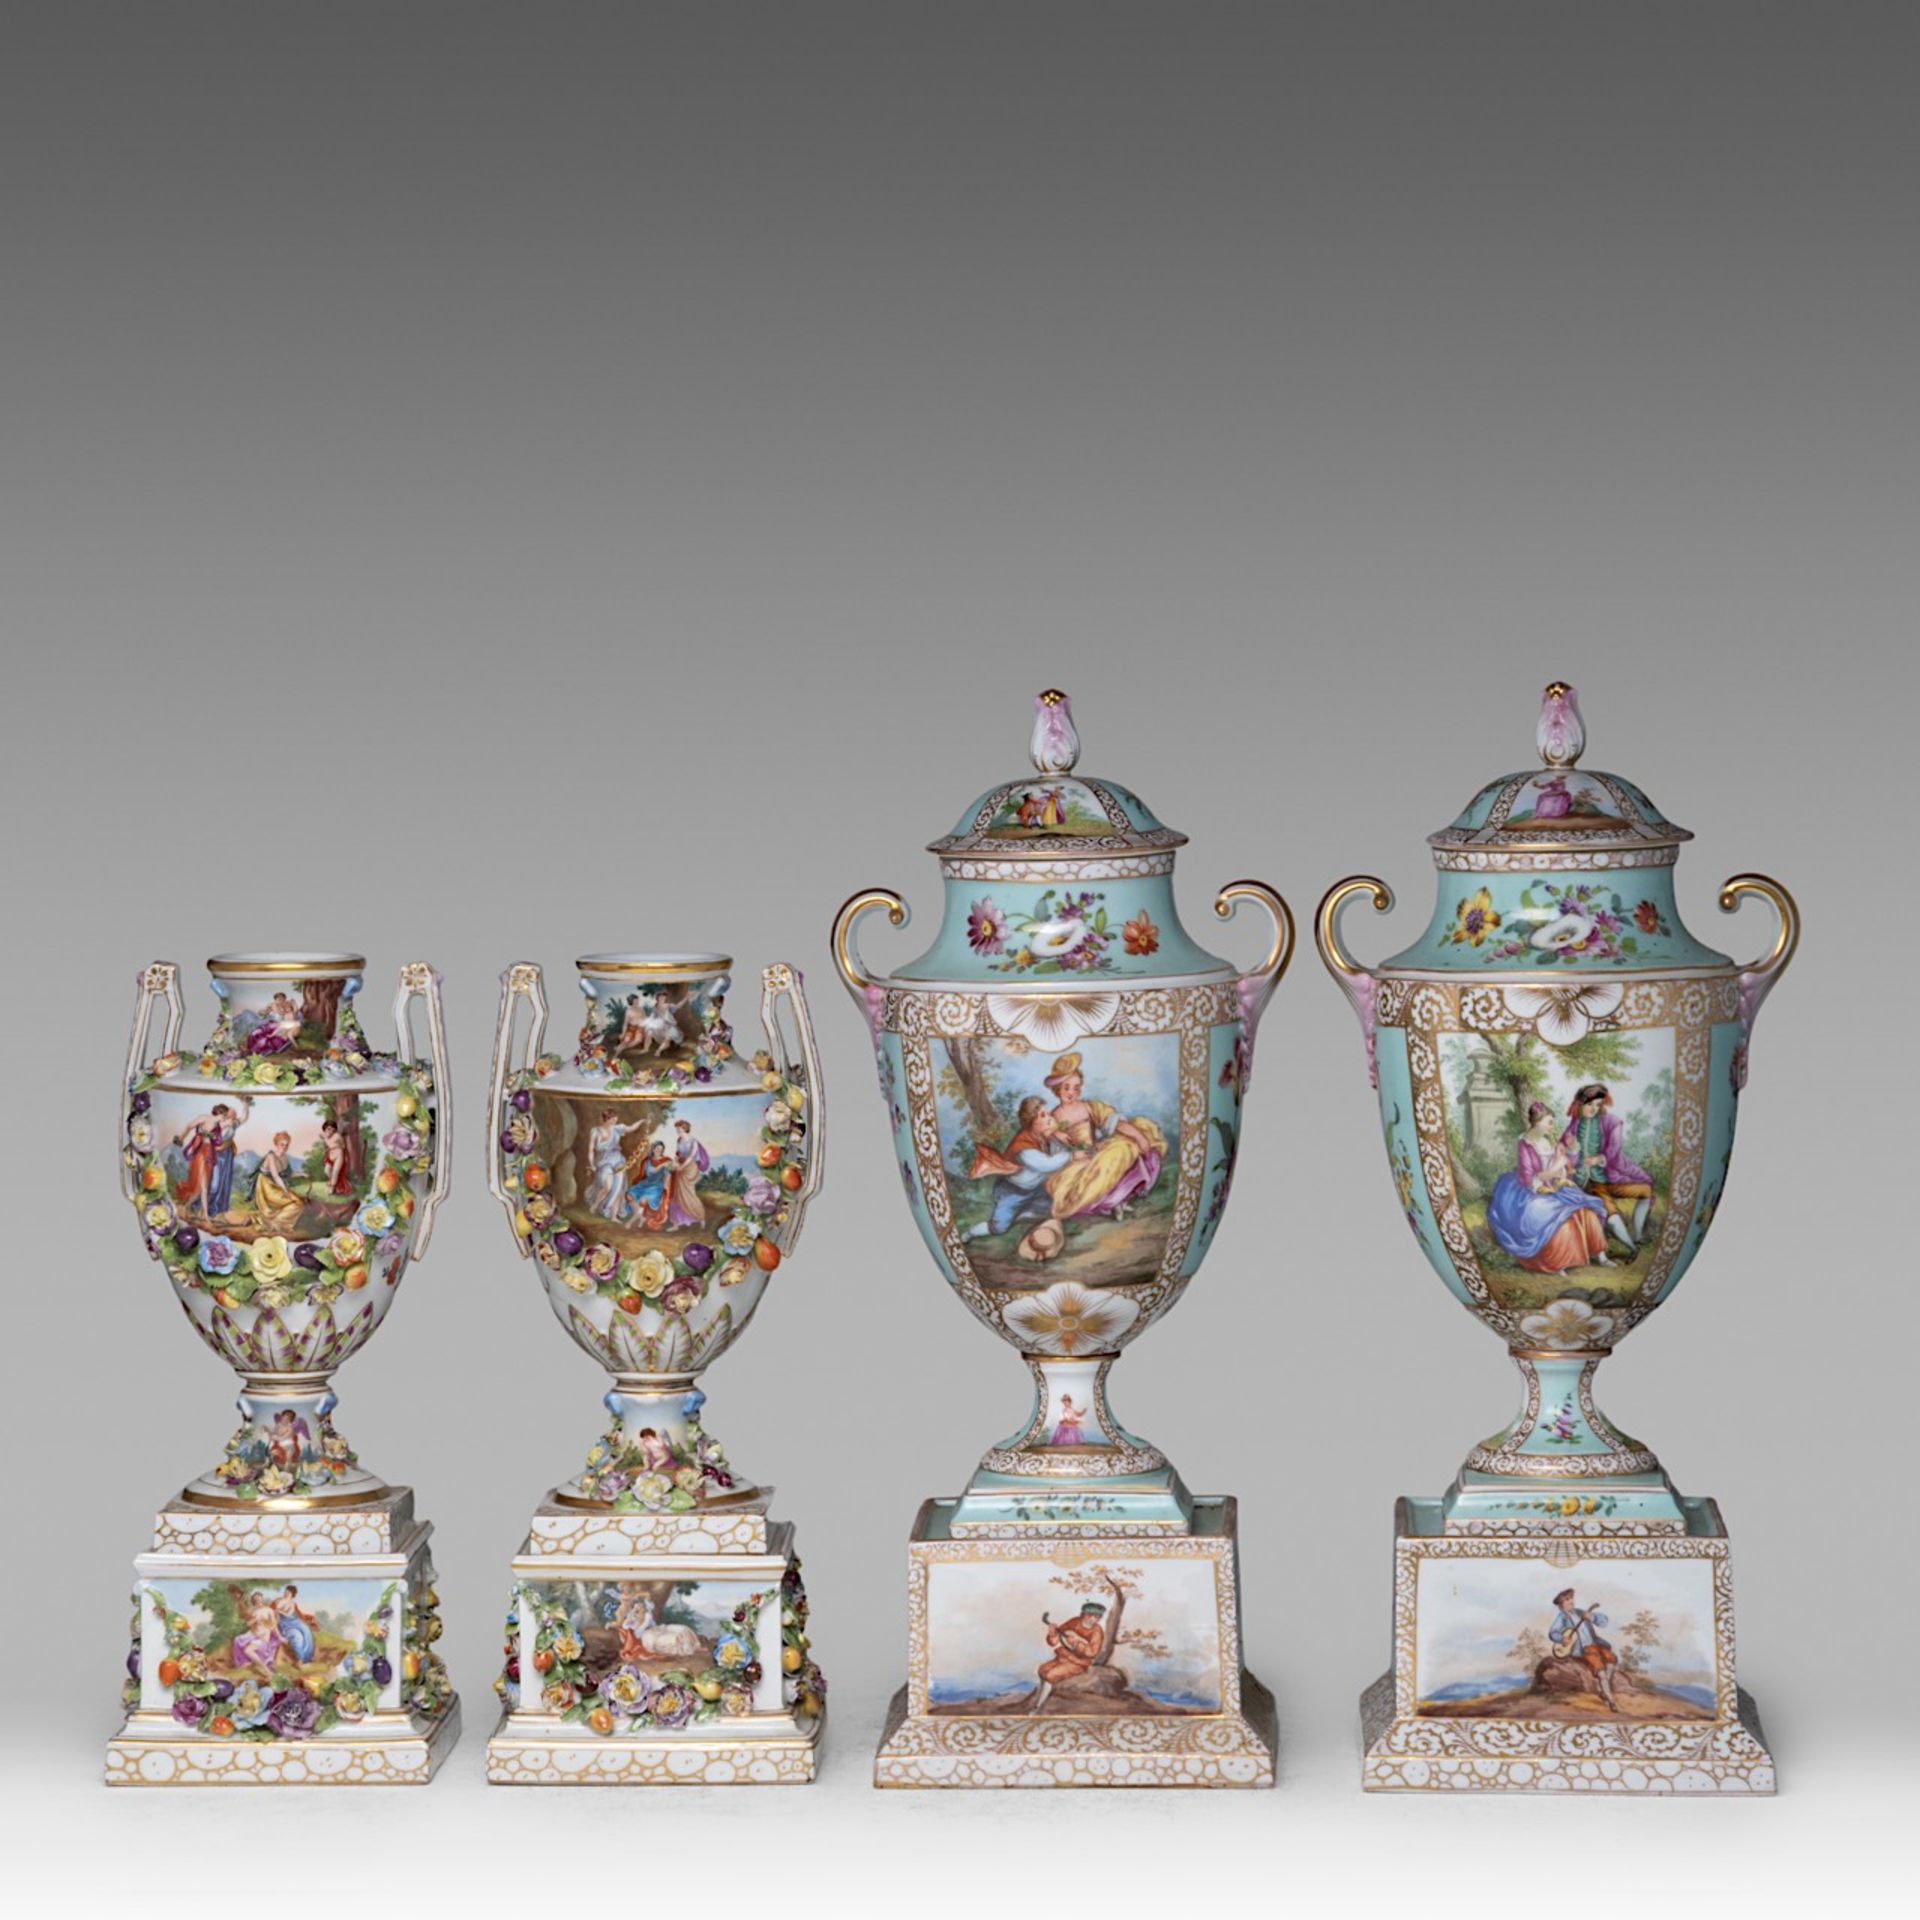 A large near pair of Vienna (or Dresden) hand-painted porcelain vases, and a smaller matching pair o